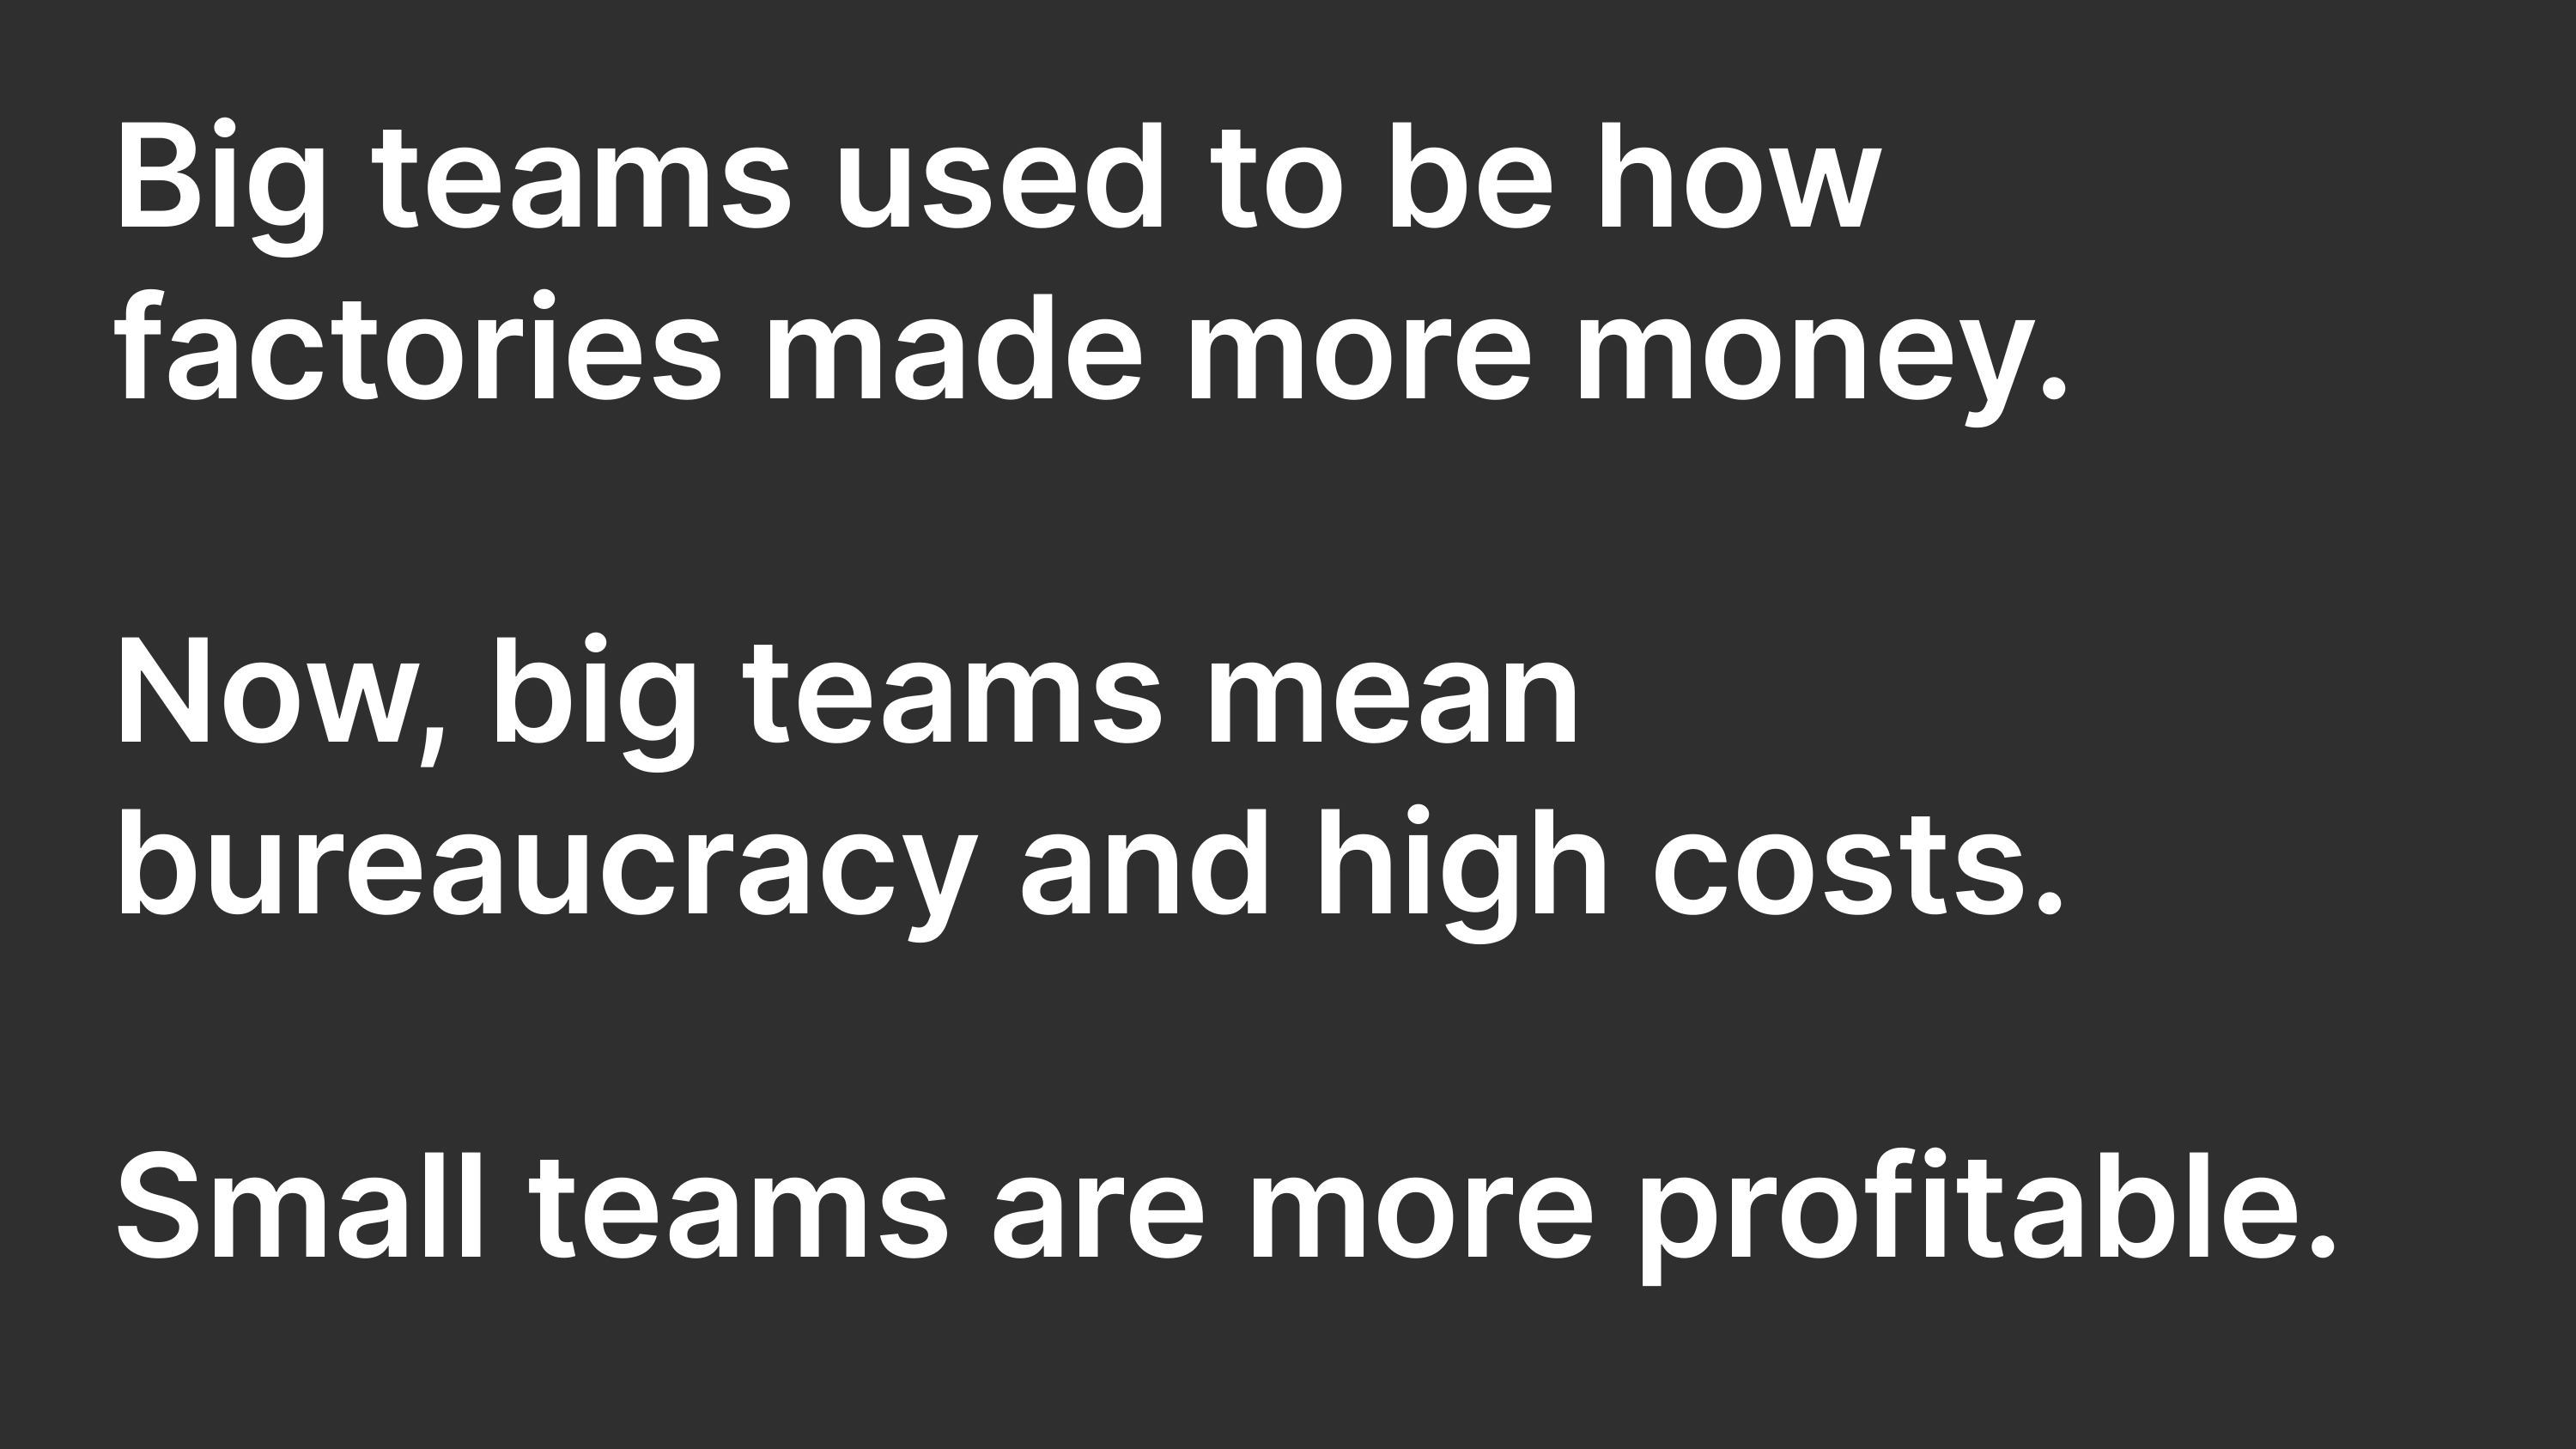 Big teams used to be how factories made more money. Now, big teams mean beaurocracy and high costs. Small teams are more profitable.